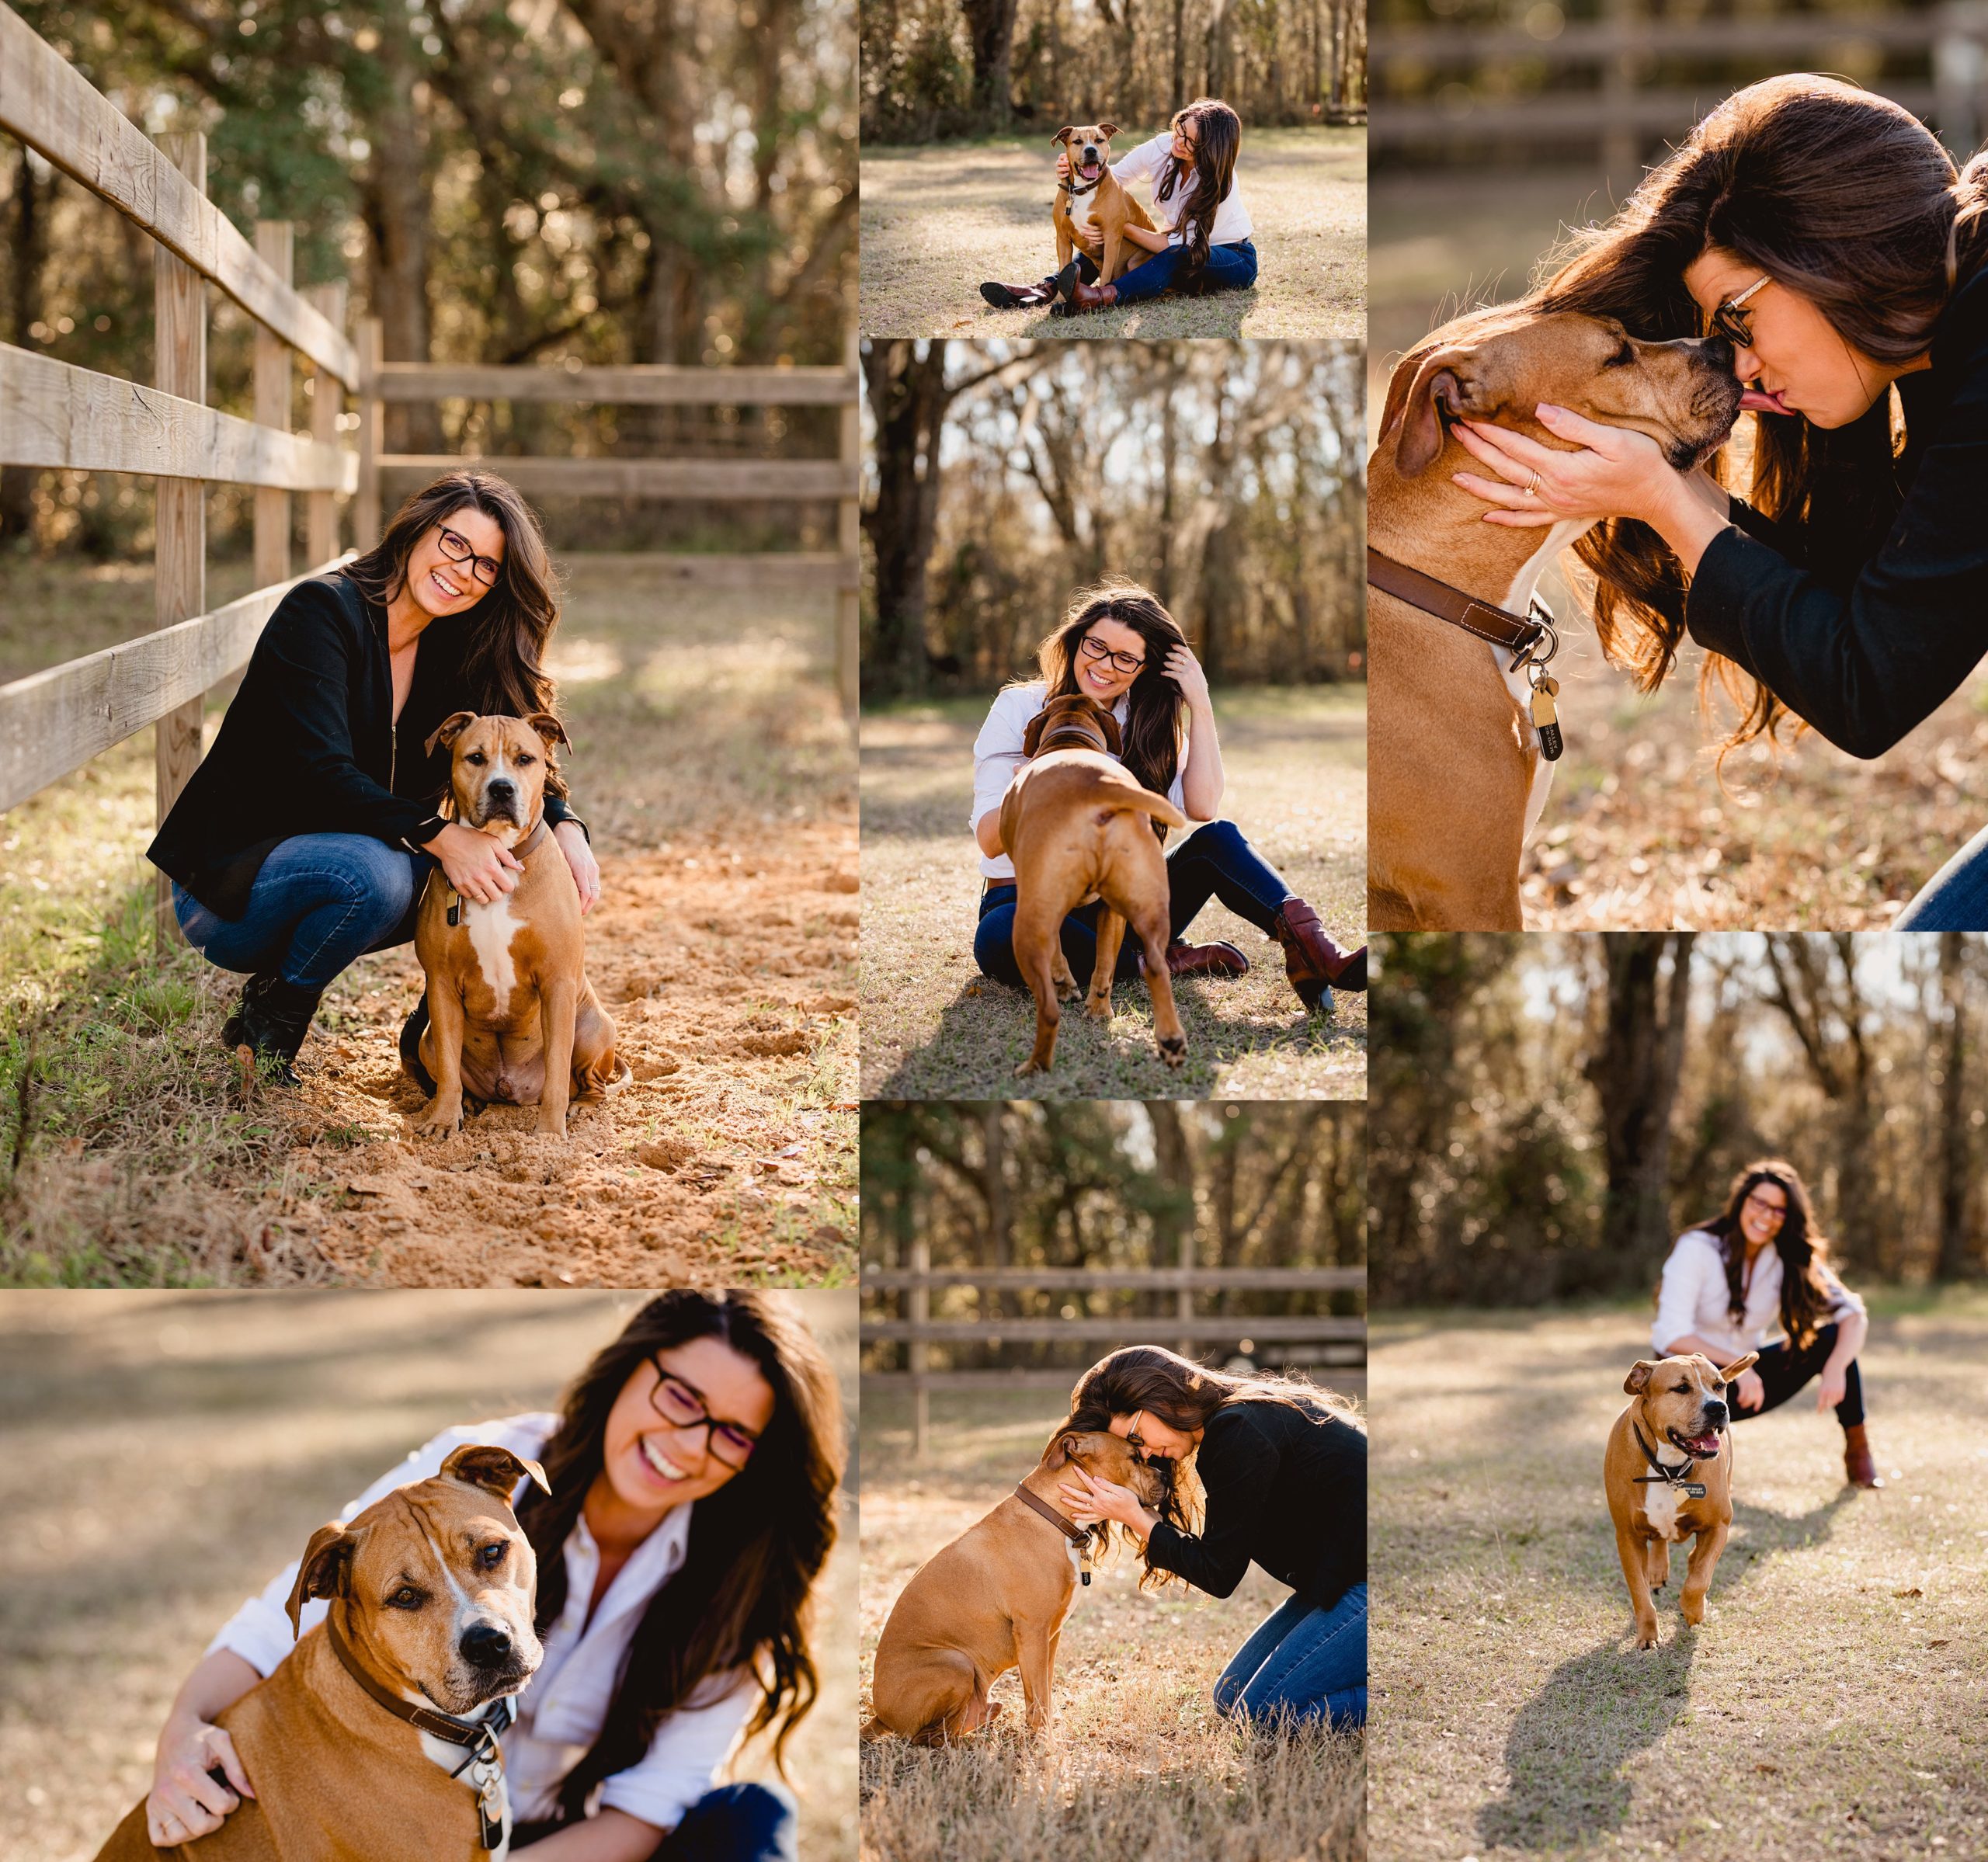 Woman photographed with her dog in Tallahassee FL by professional photographer. Posing ideas for woman and dog.